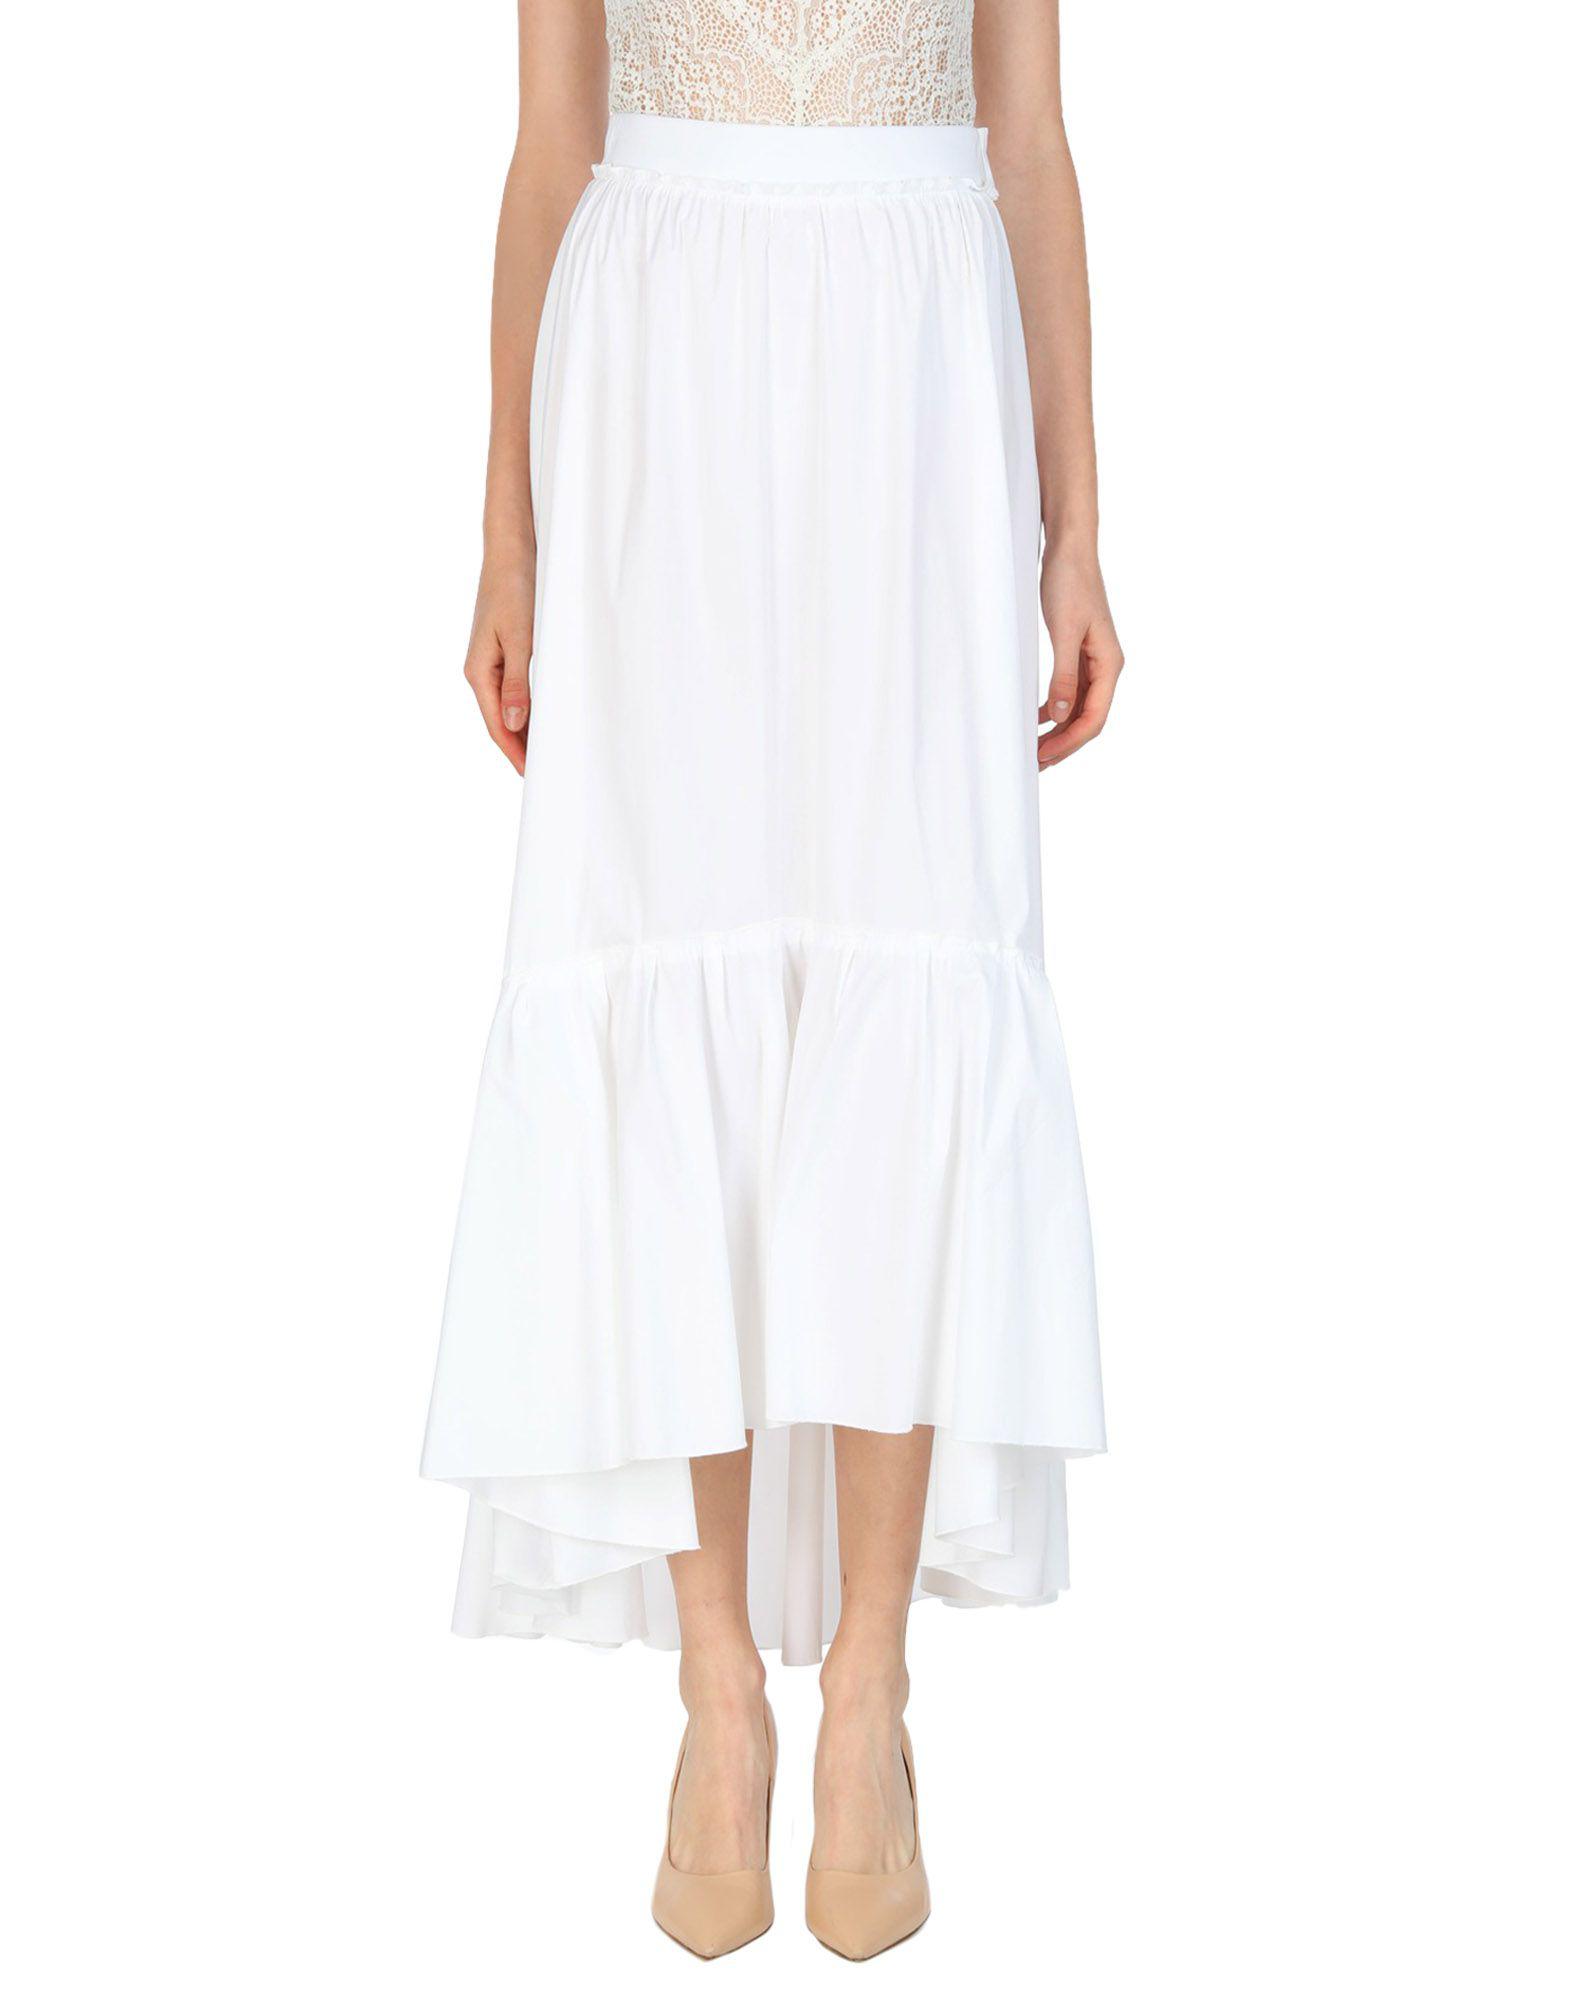 FEDERICA TOSI Cotton Long Skirt in White - Lyst